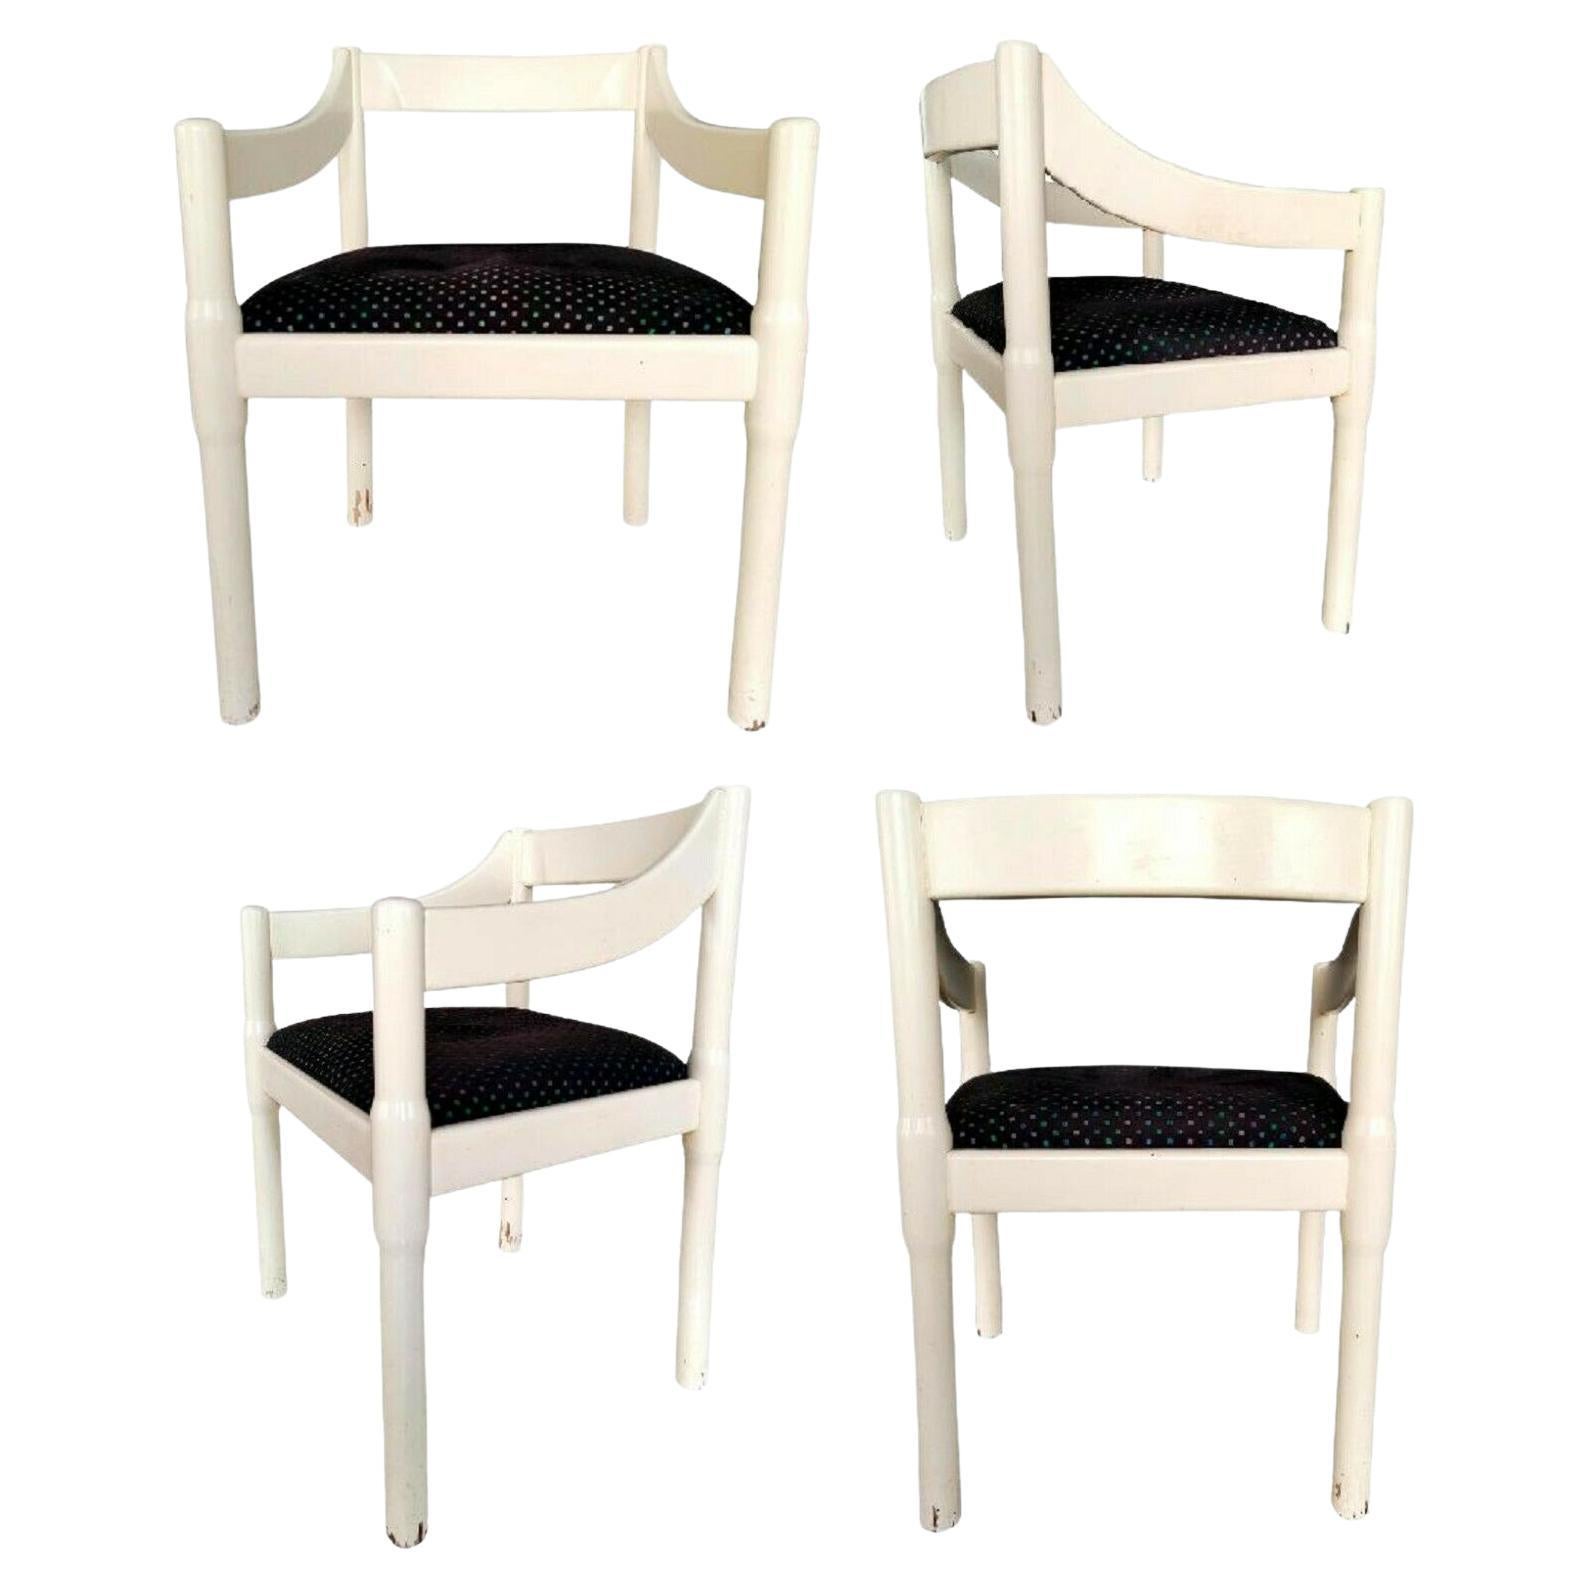 Set of Four "Carimate" Chairs Designed by Vico Magistretti for Cassina, 1960s